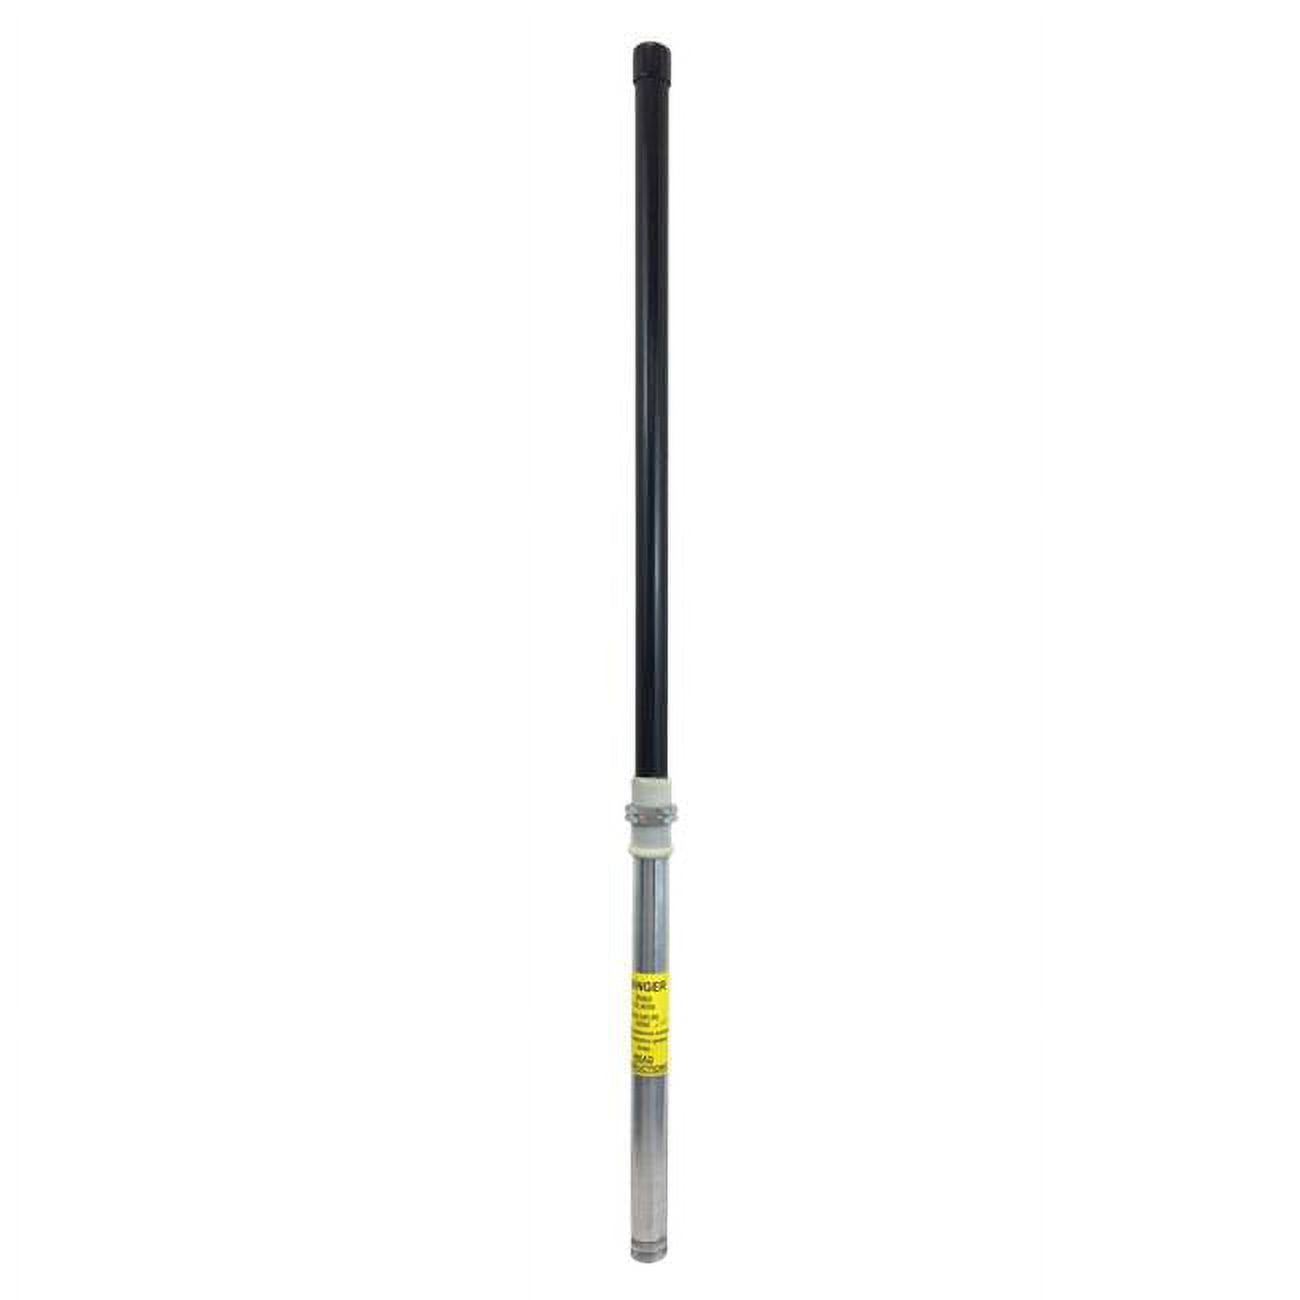 Picture of Procomm PT3 36 in. Low Profile No-Ground Base Station Antenna - Black